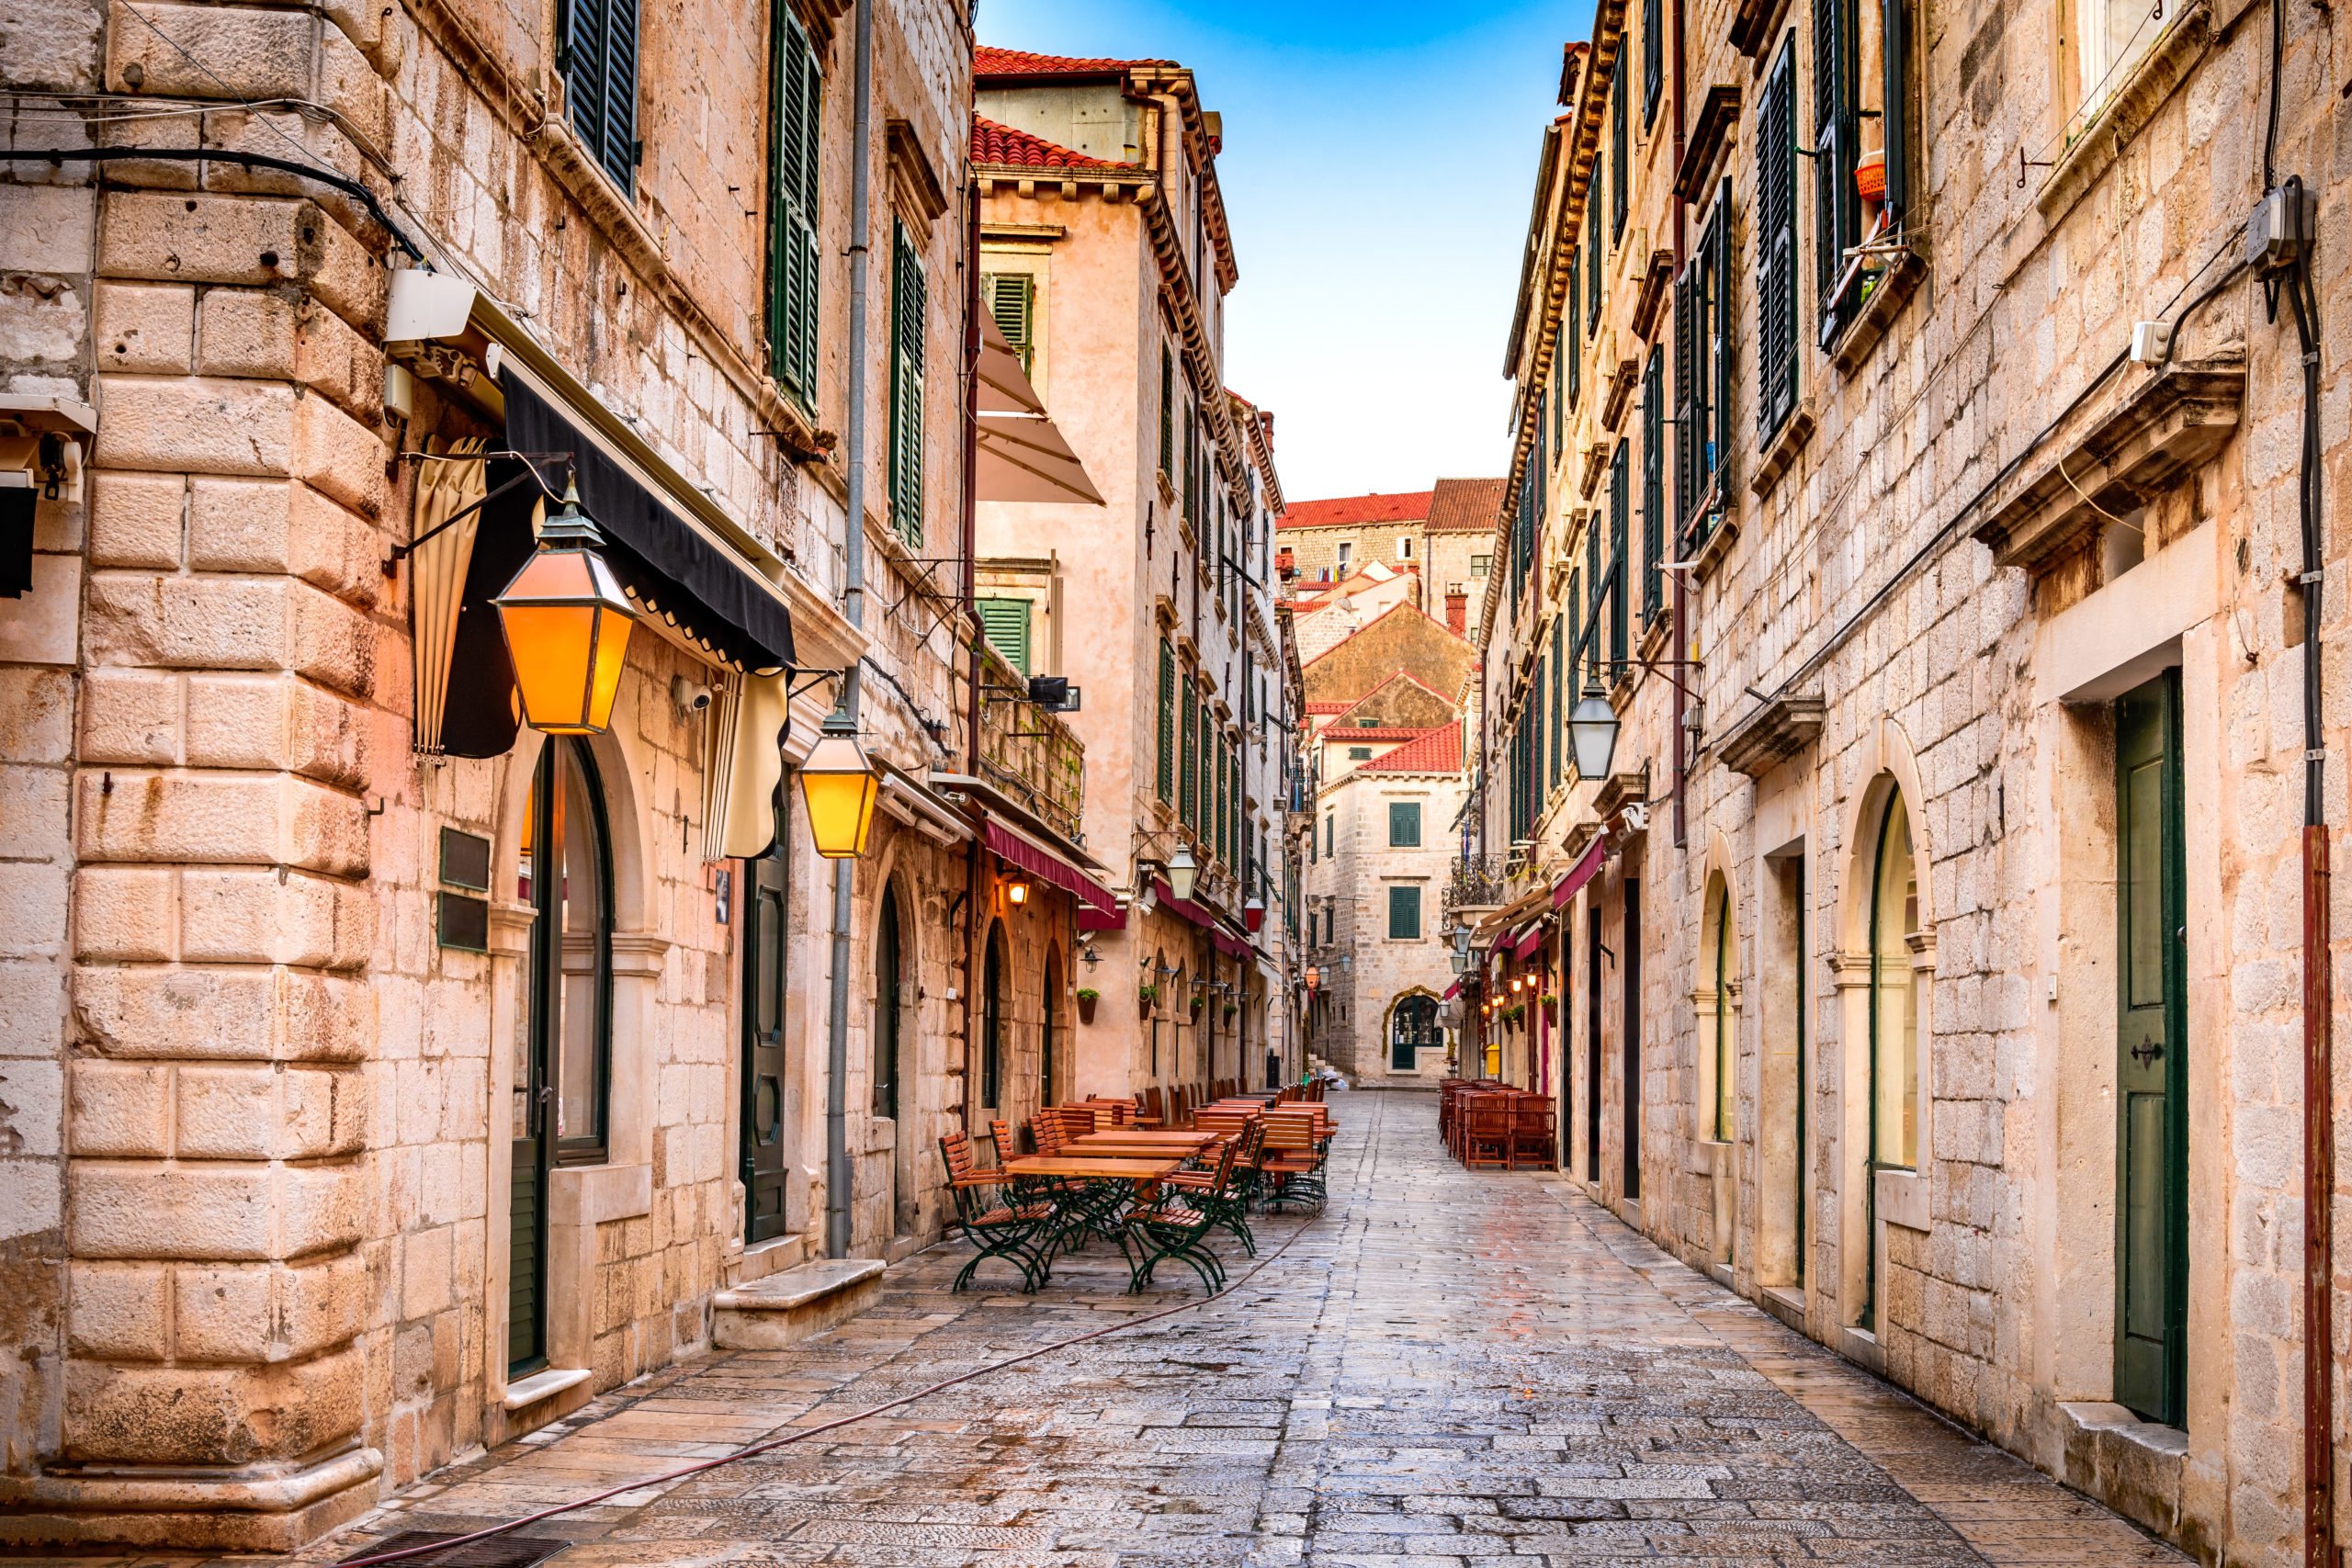 Stroll Through The Historic Quarter Of Dubrovnik On Your Dubrovnik Highlights & Cavtat Shore Excursion